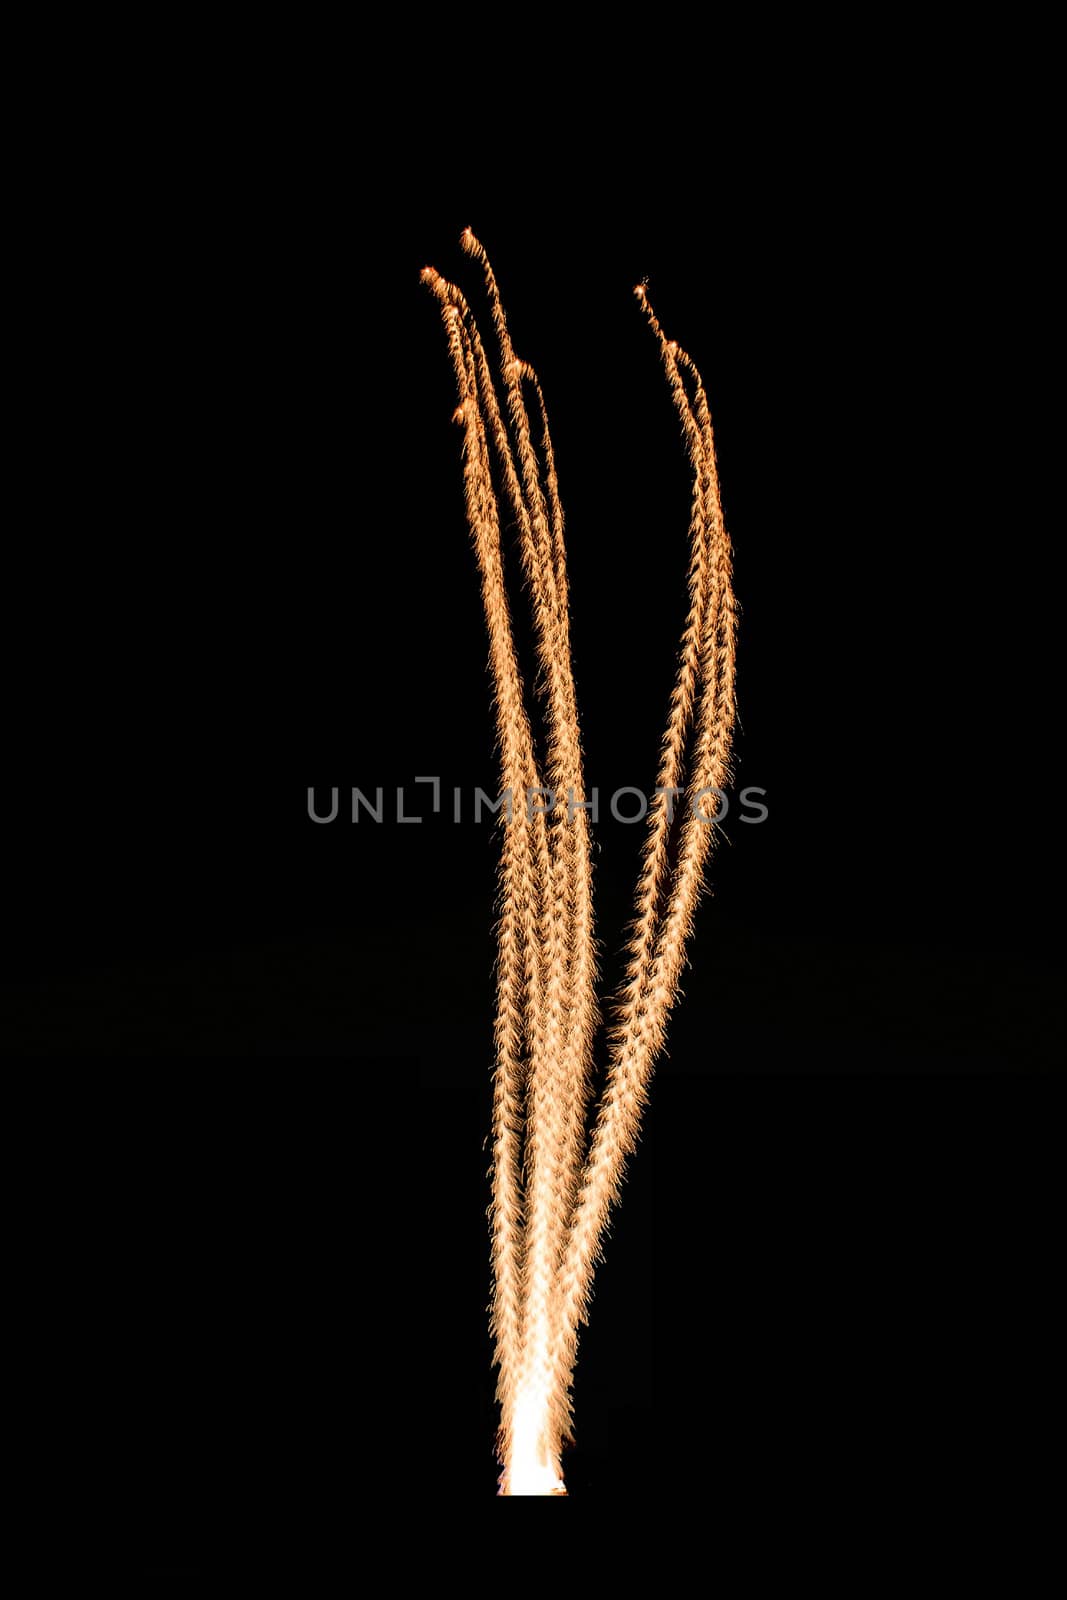 Real isolated firework, anti-missile flare or swirling rocket trail pattern